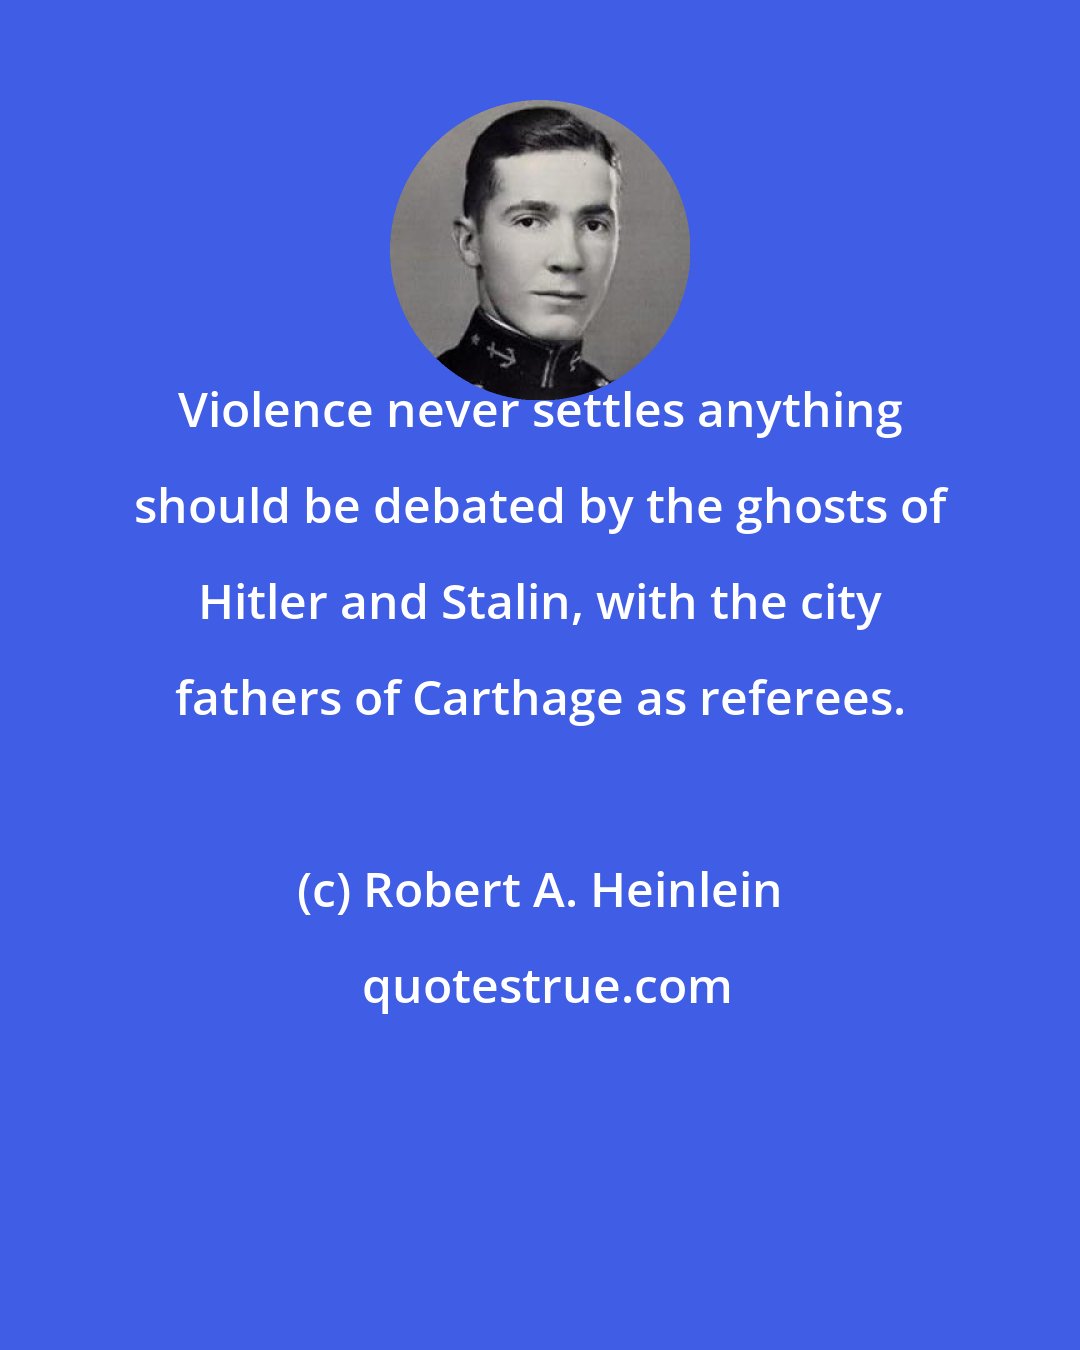 Robert A. Heinlein: Violence never settles anything should be debated by the ghosts of Hitler and Stalin, with the city fathers of Carthage as referees.